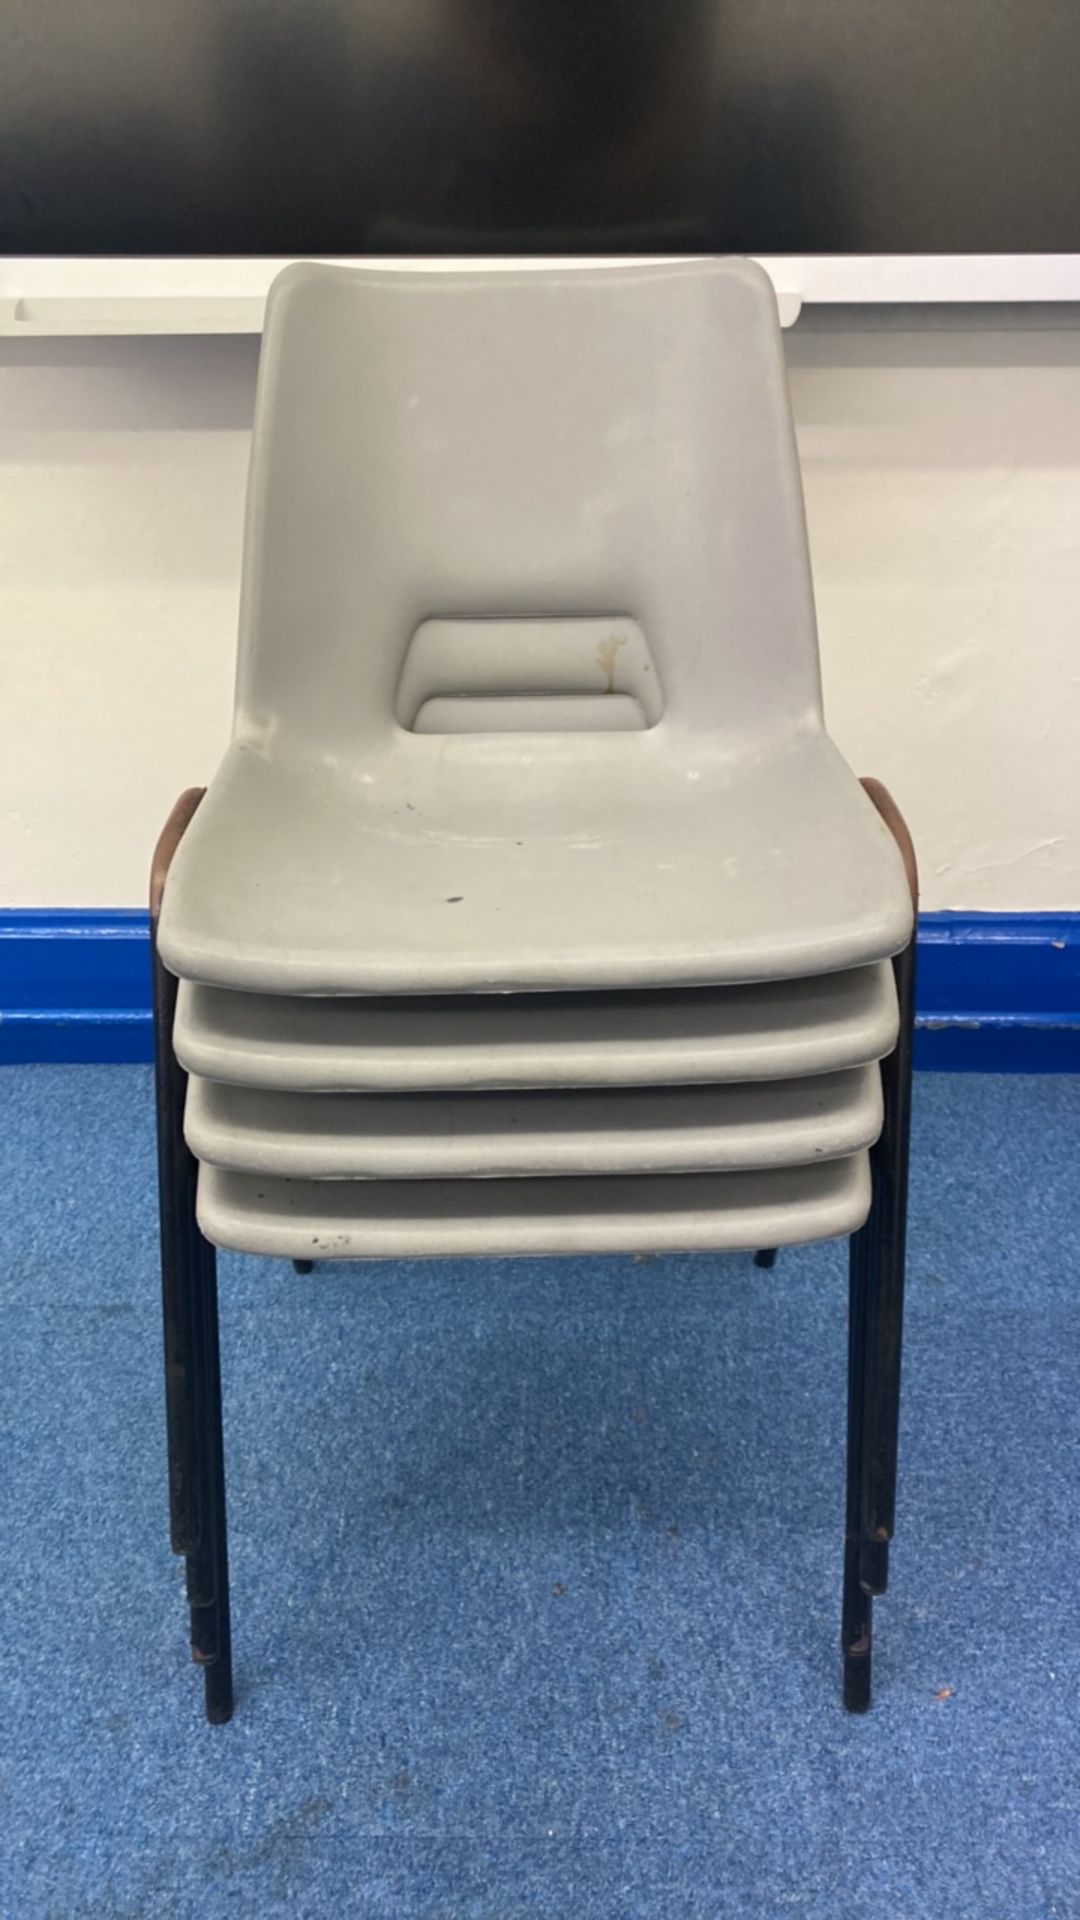 Plastic Assembly Chair X4 - Image 2 of 6